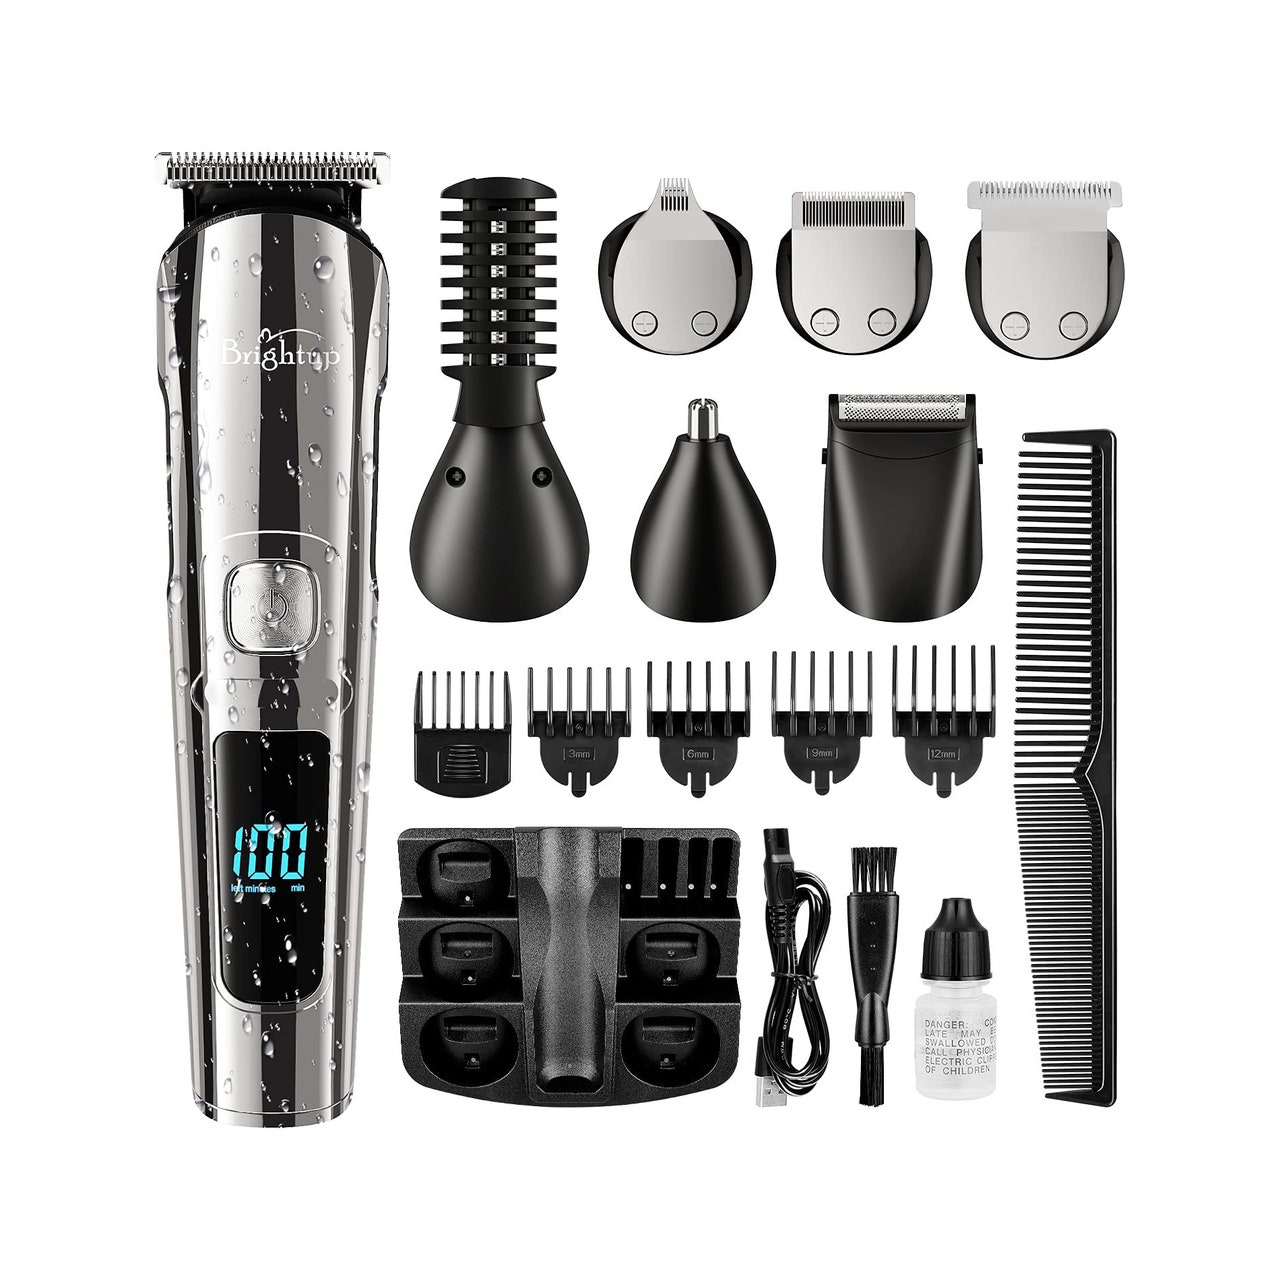 Brightup Beard Trimmer Grooming Kit on white background